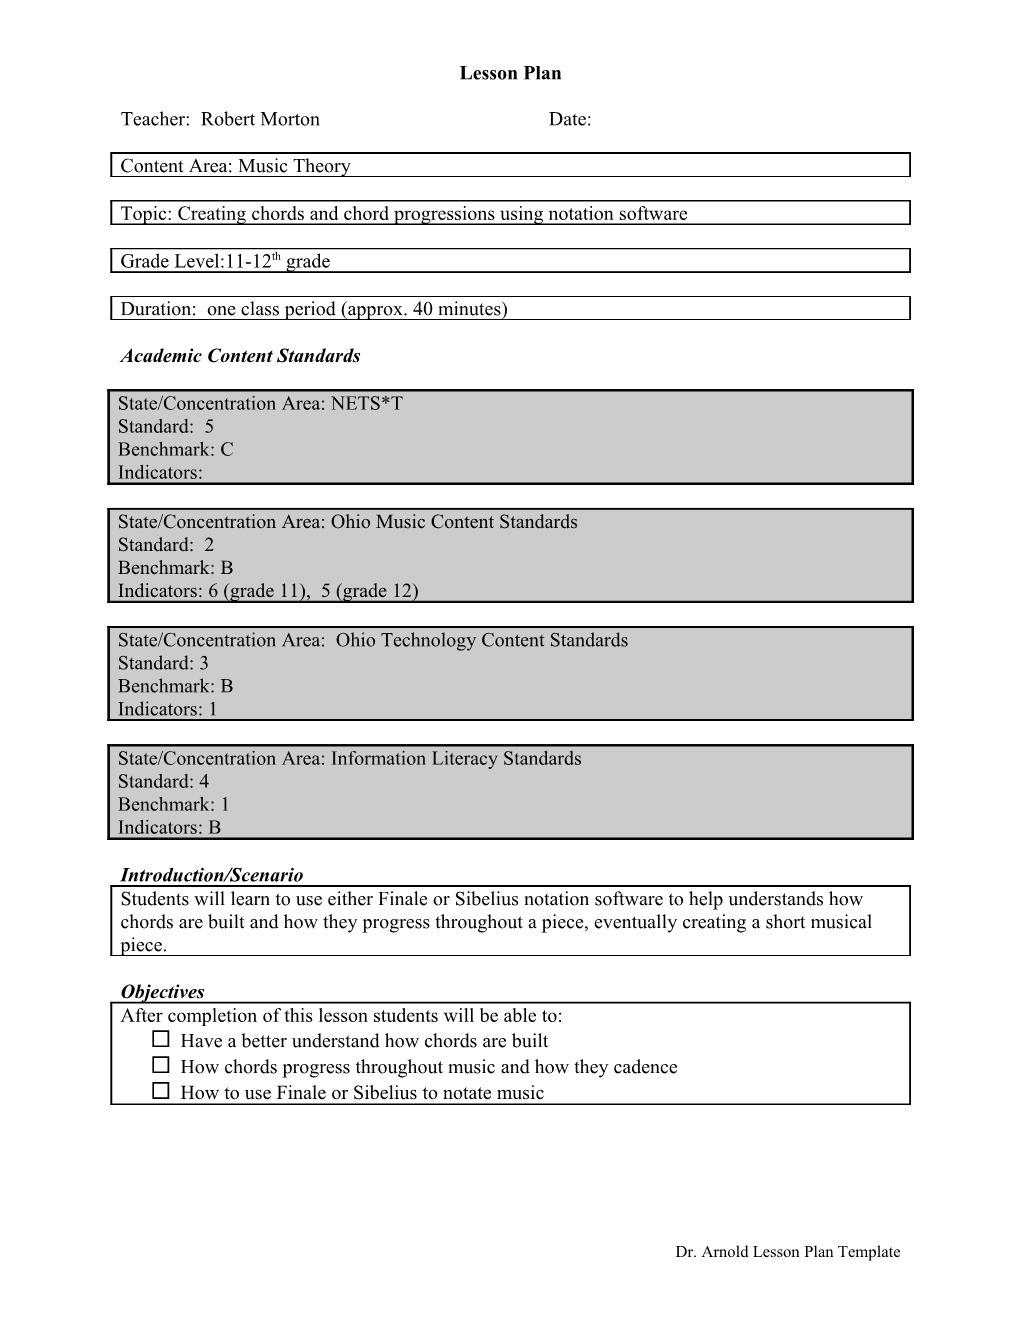 Dr. Arnold Lesson Plan Template